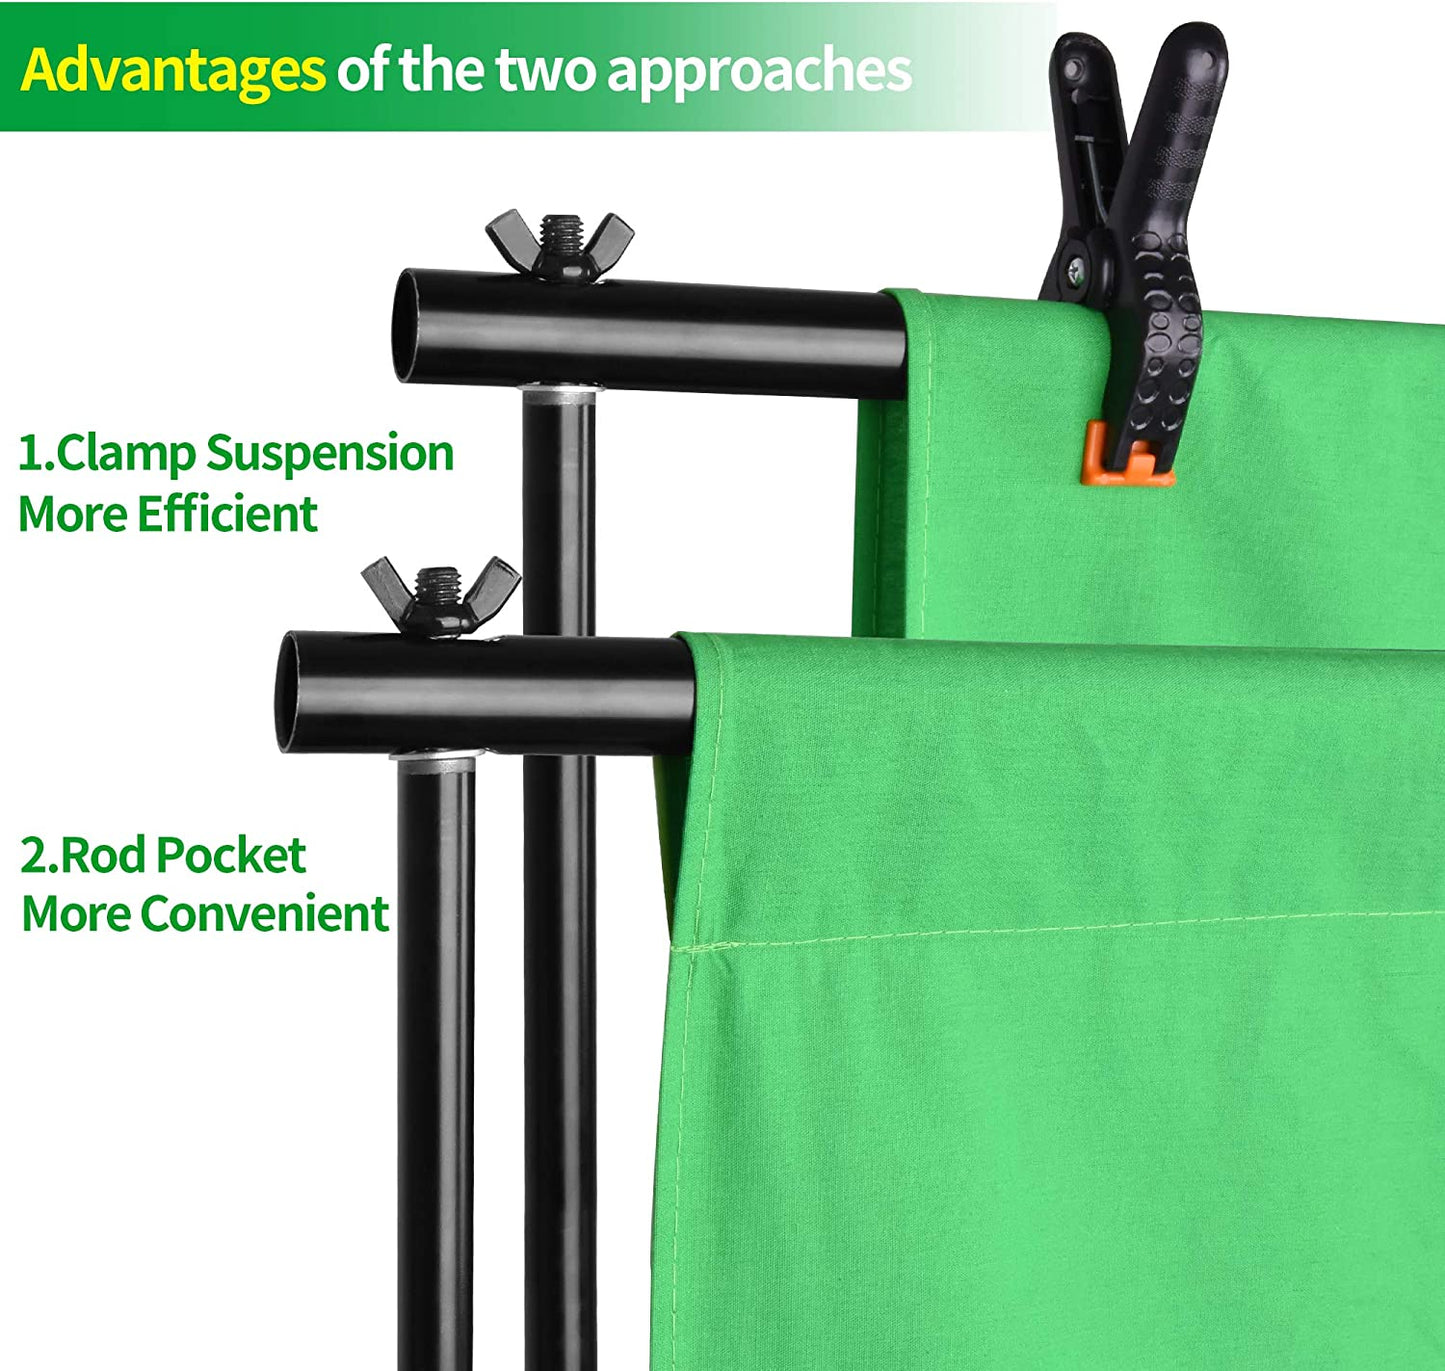 EMART Photo Video Studio 8.5 X 10Ft Green Screen Backdrop Stand Kit, Photography Background Support System with 10 X12Ft 100% Cotton Muslin Chromakey Backdrop